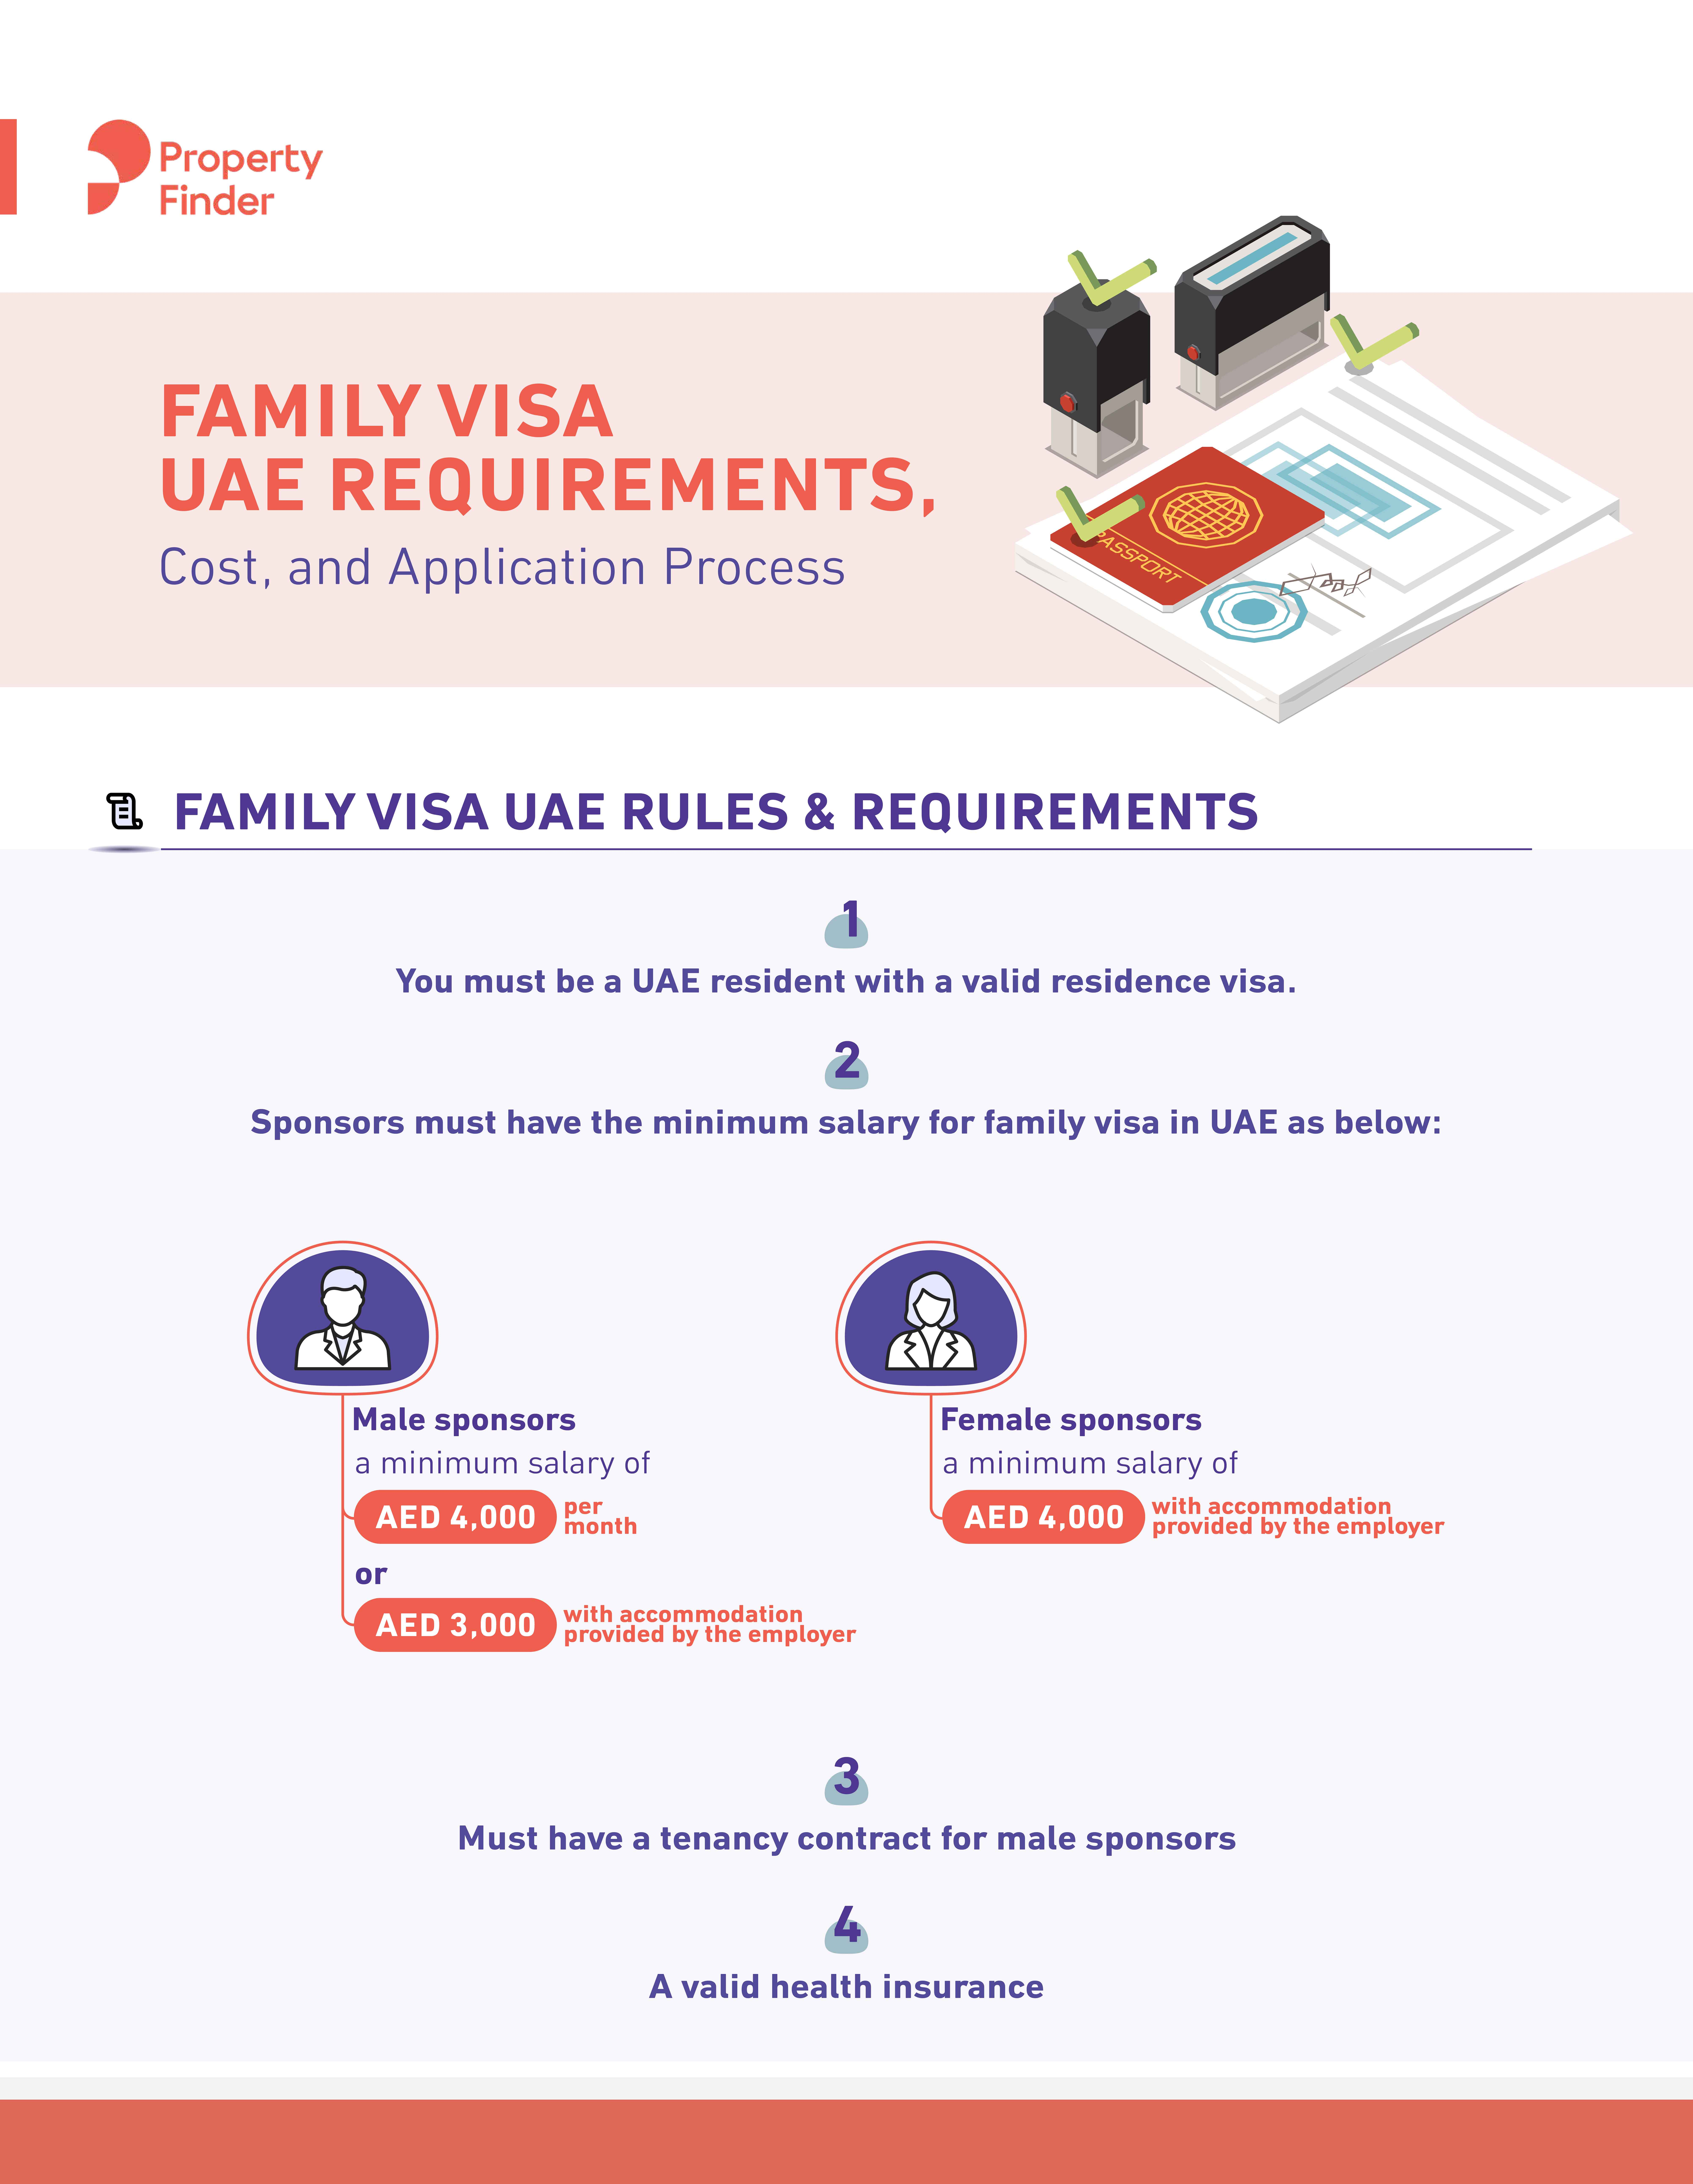 Family Visa UAE Rules & Requirements